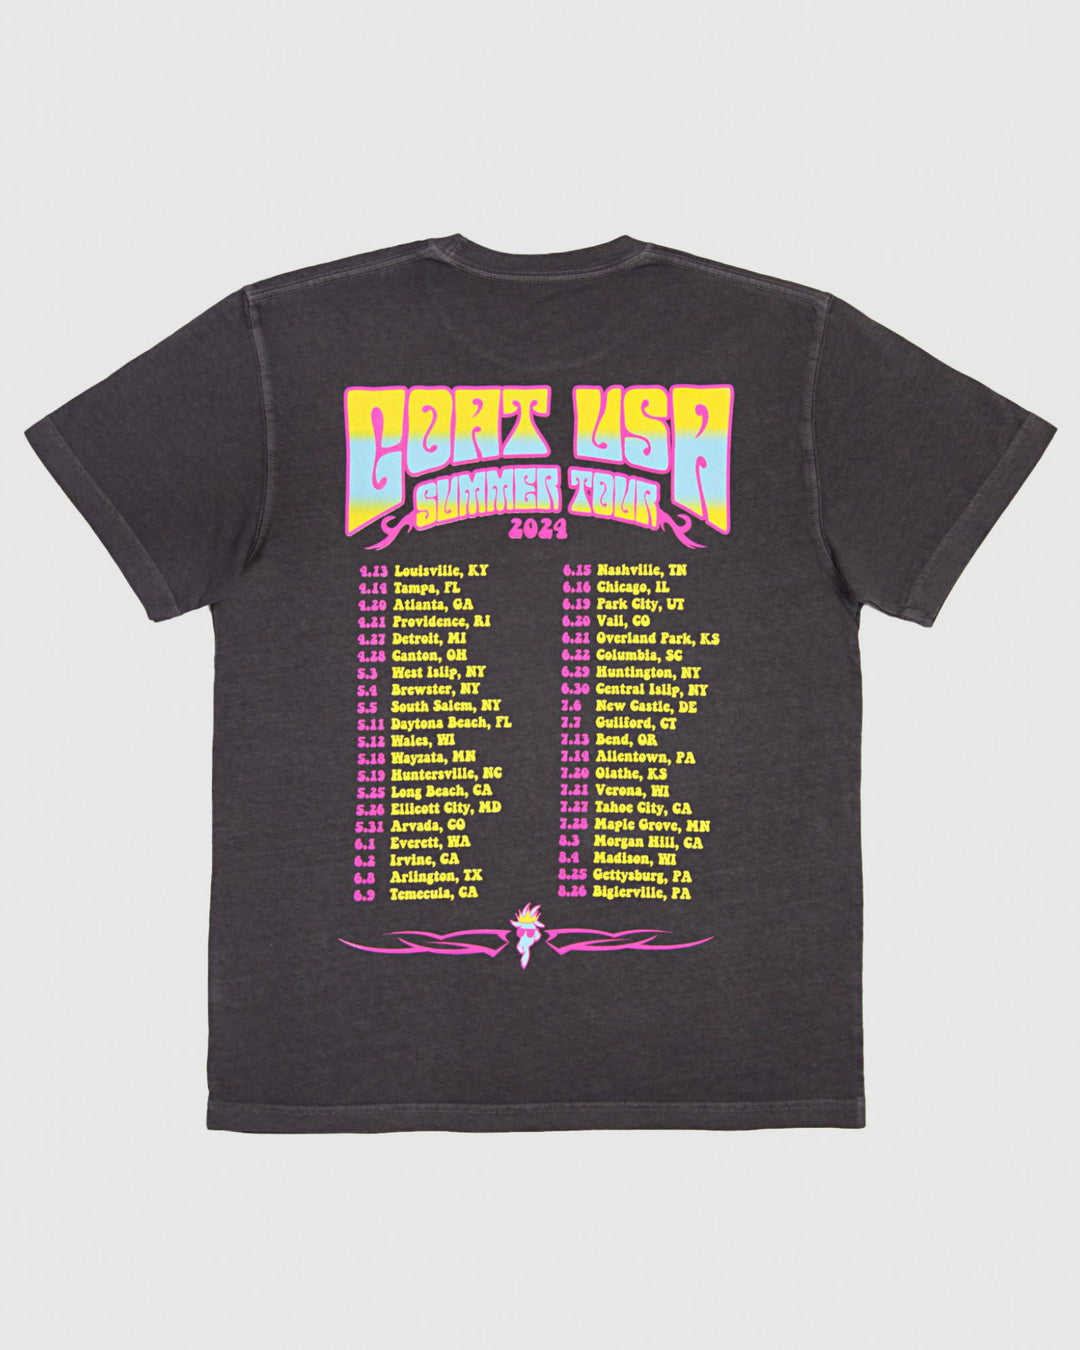 Band style t-shirt with tour dates and locations